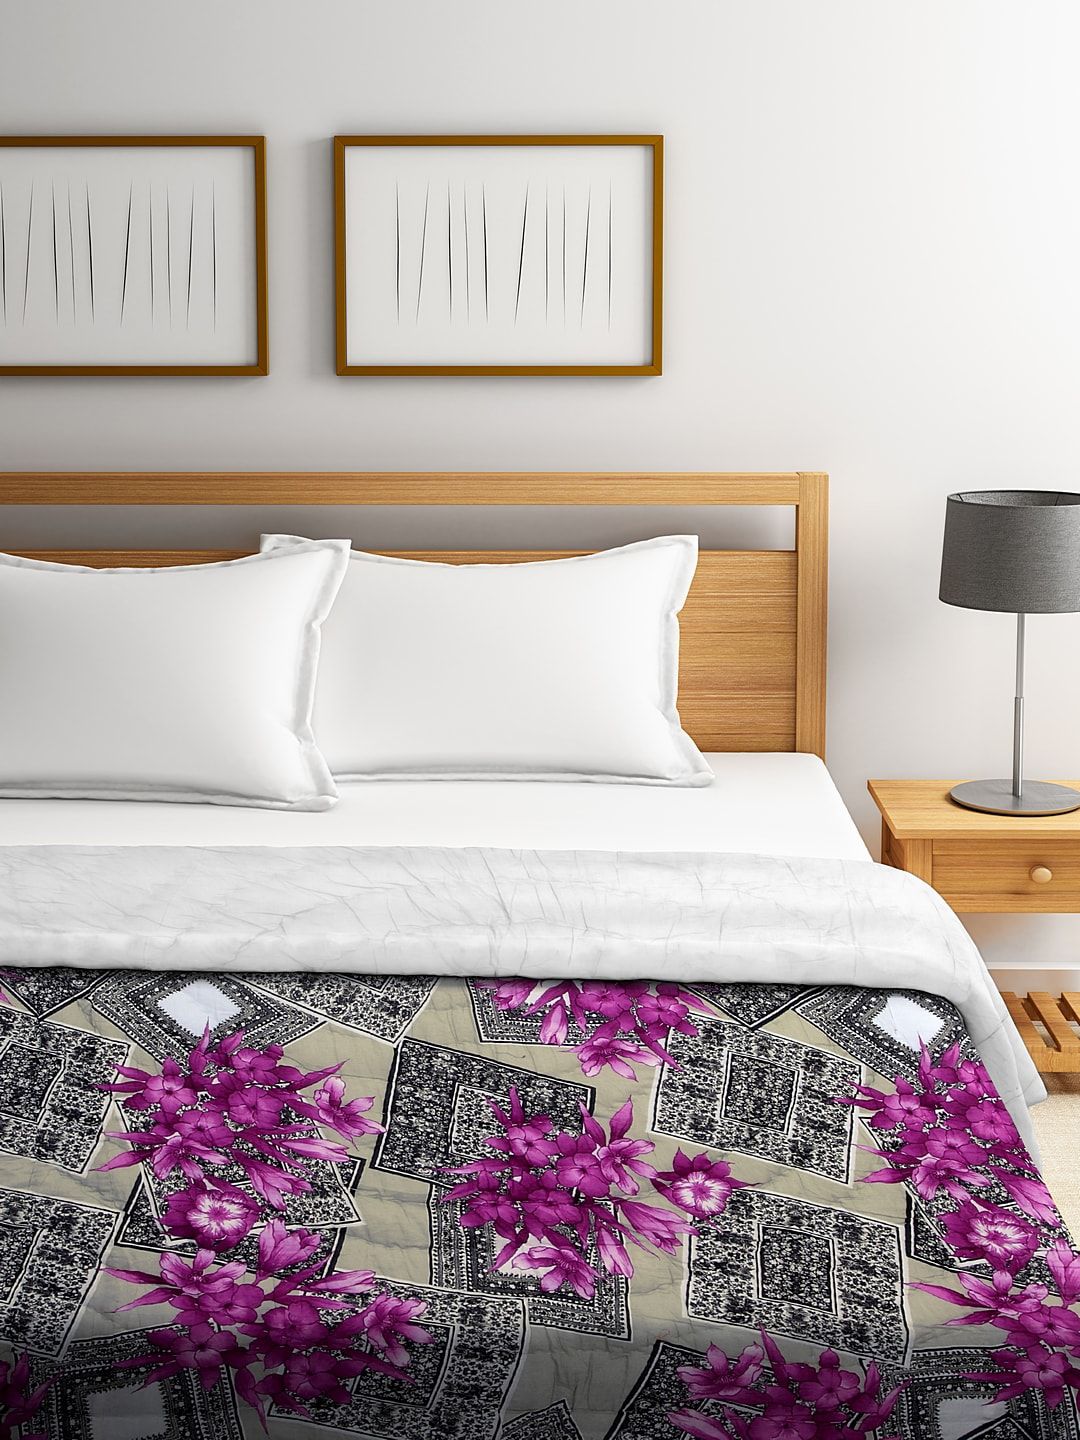 REME Black & Grey Digital Floral Printed Organic-Cotton Heavy Winter 150 GSM Sustainable Double Bed Quilt Price in India